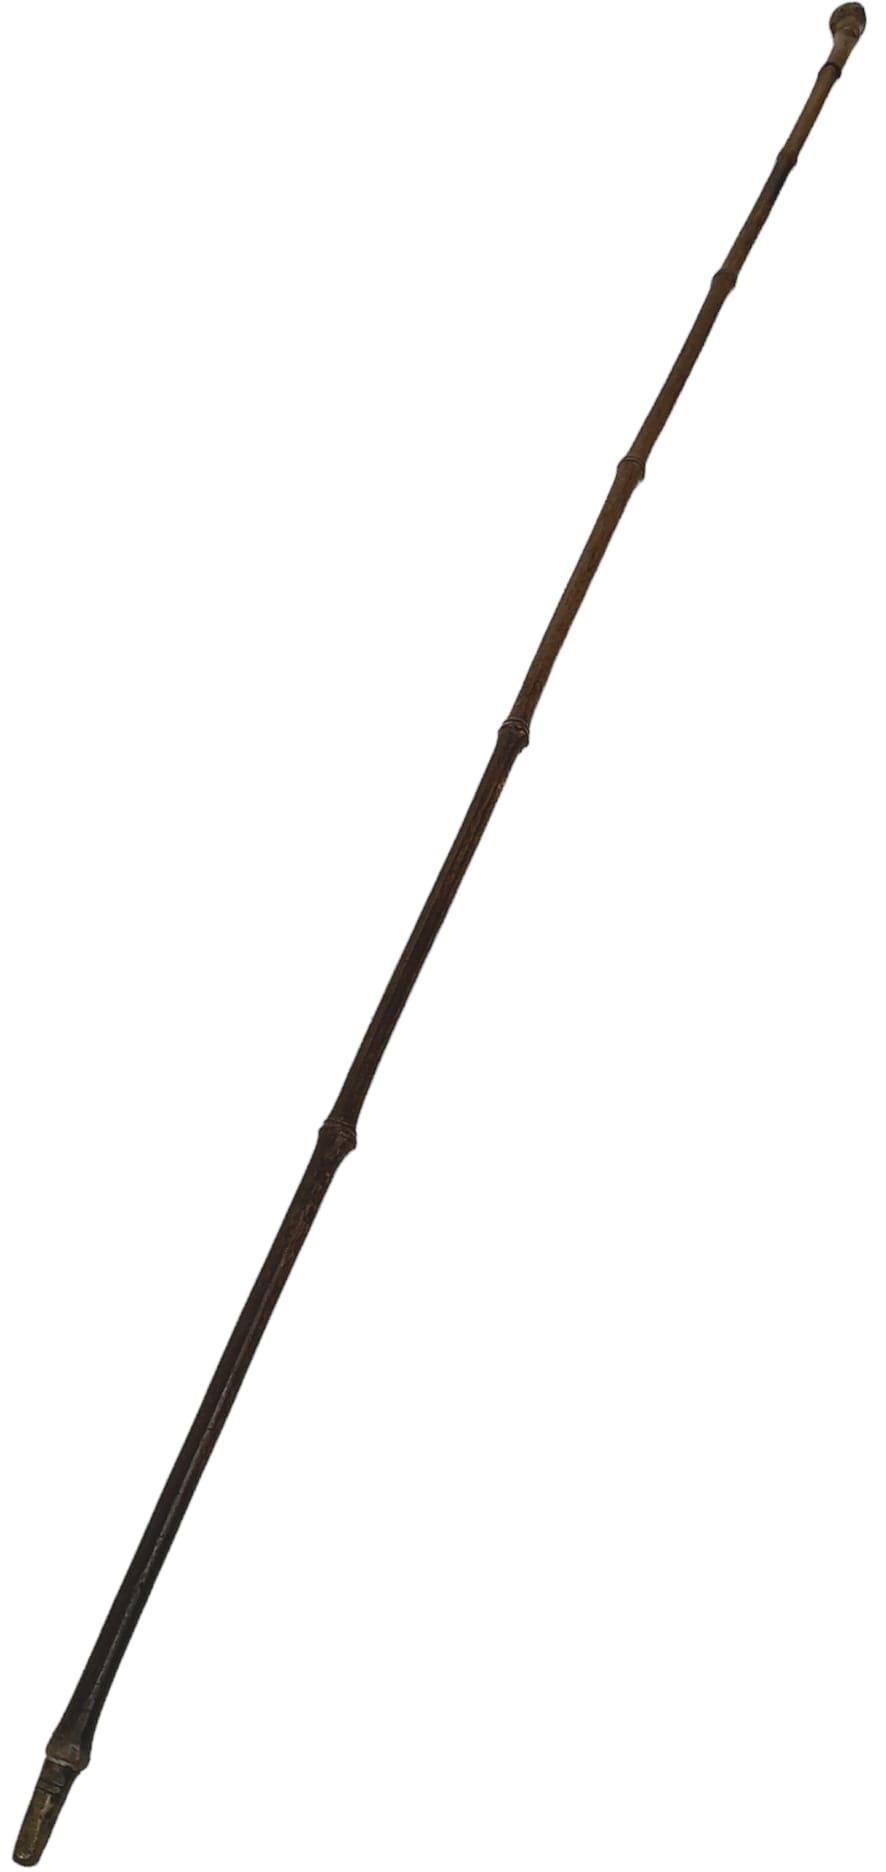 A Bamboo Swagger/Walking Sword Stick. 76cm Long in Good Condition. - Image 2 of 5